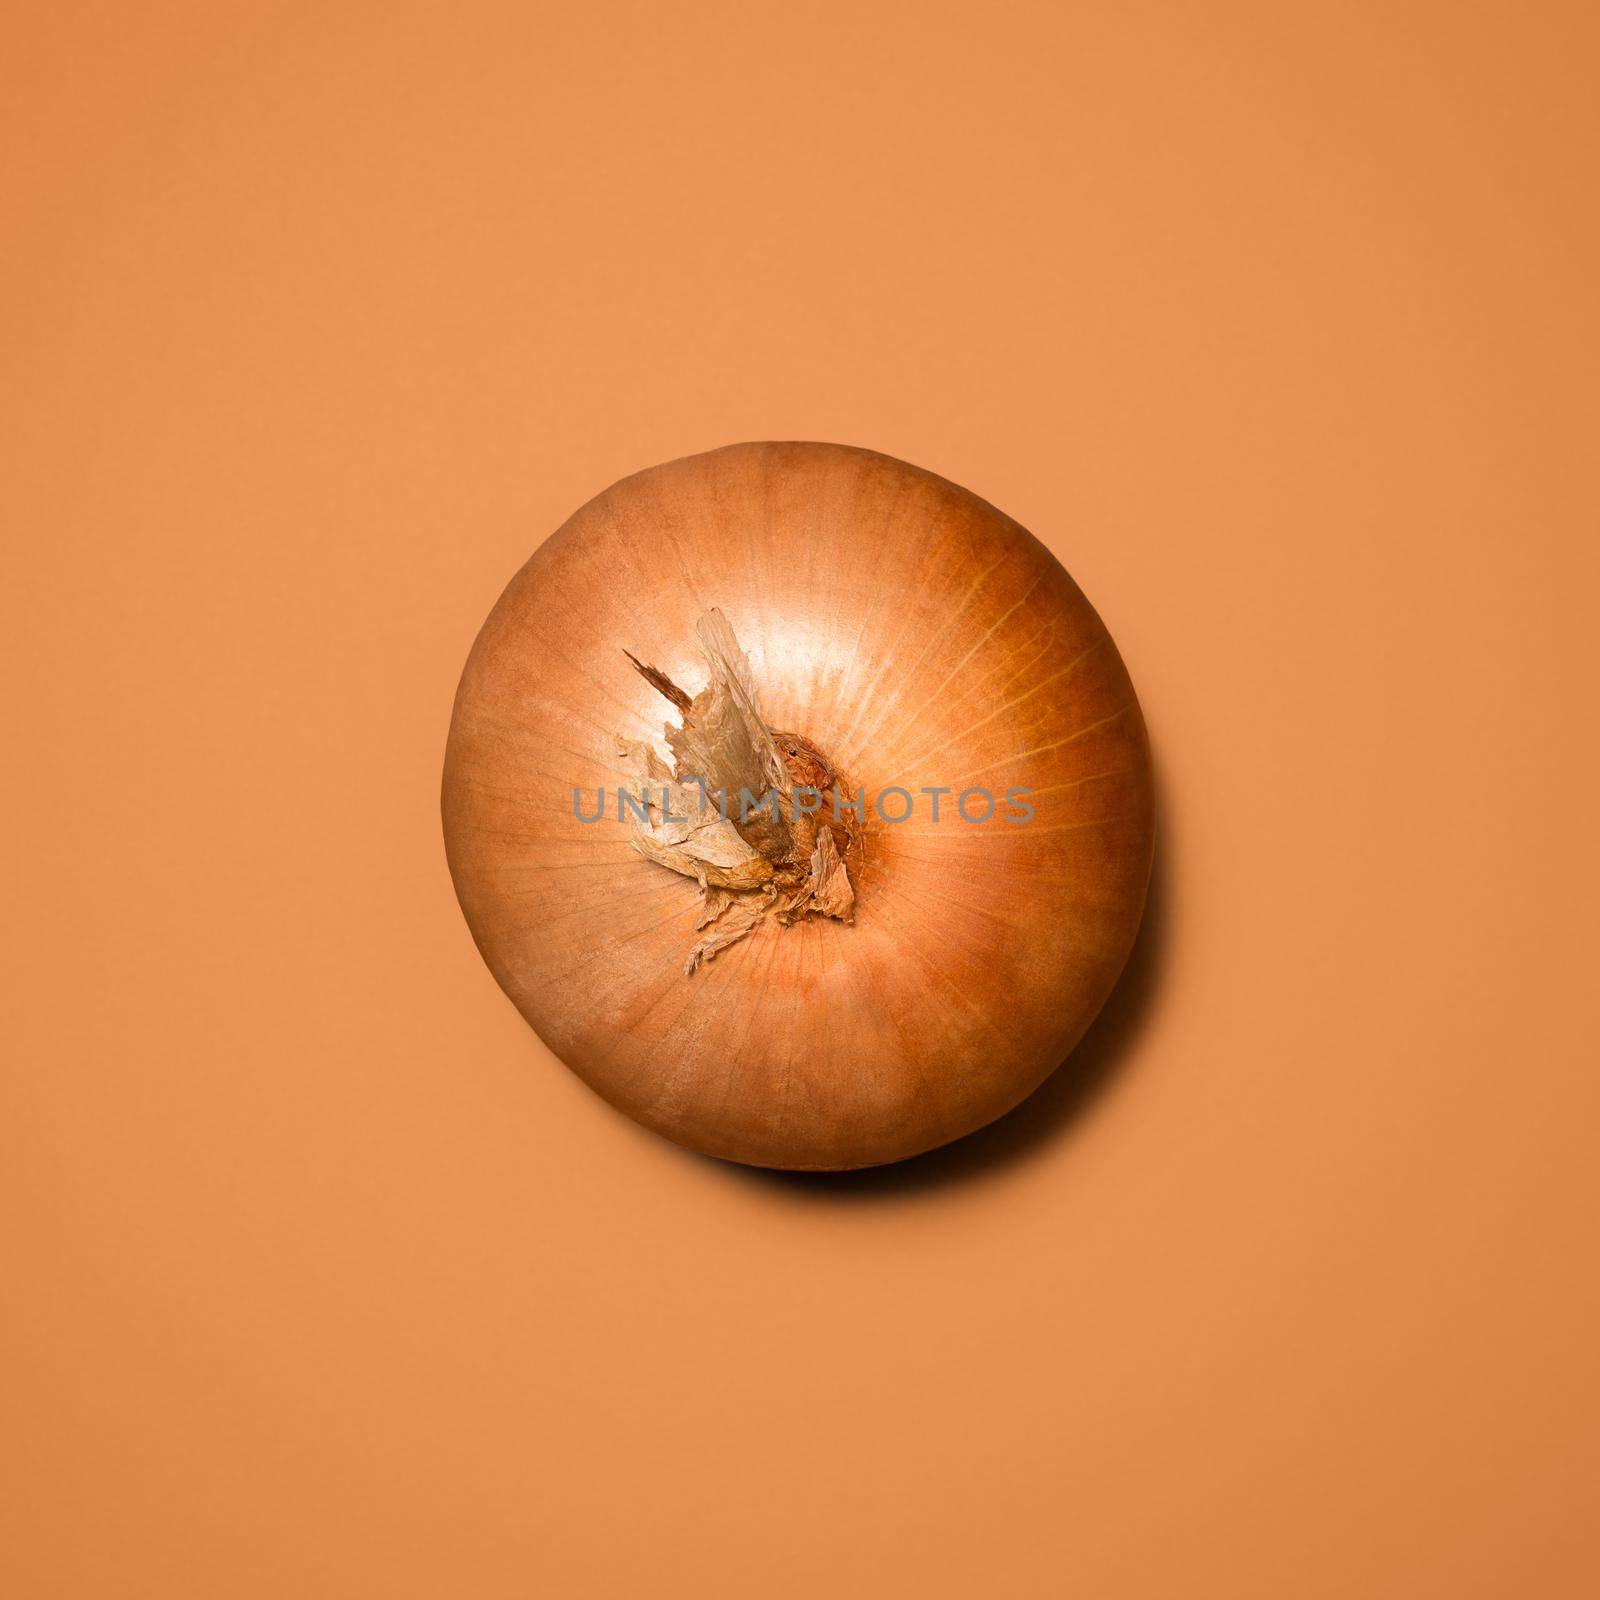 Shot of an onion against a studio background.